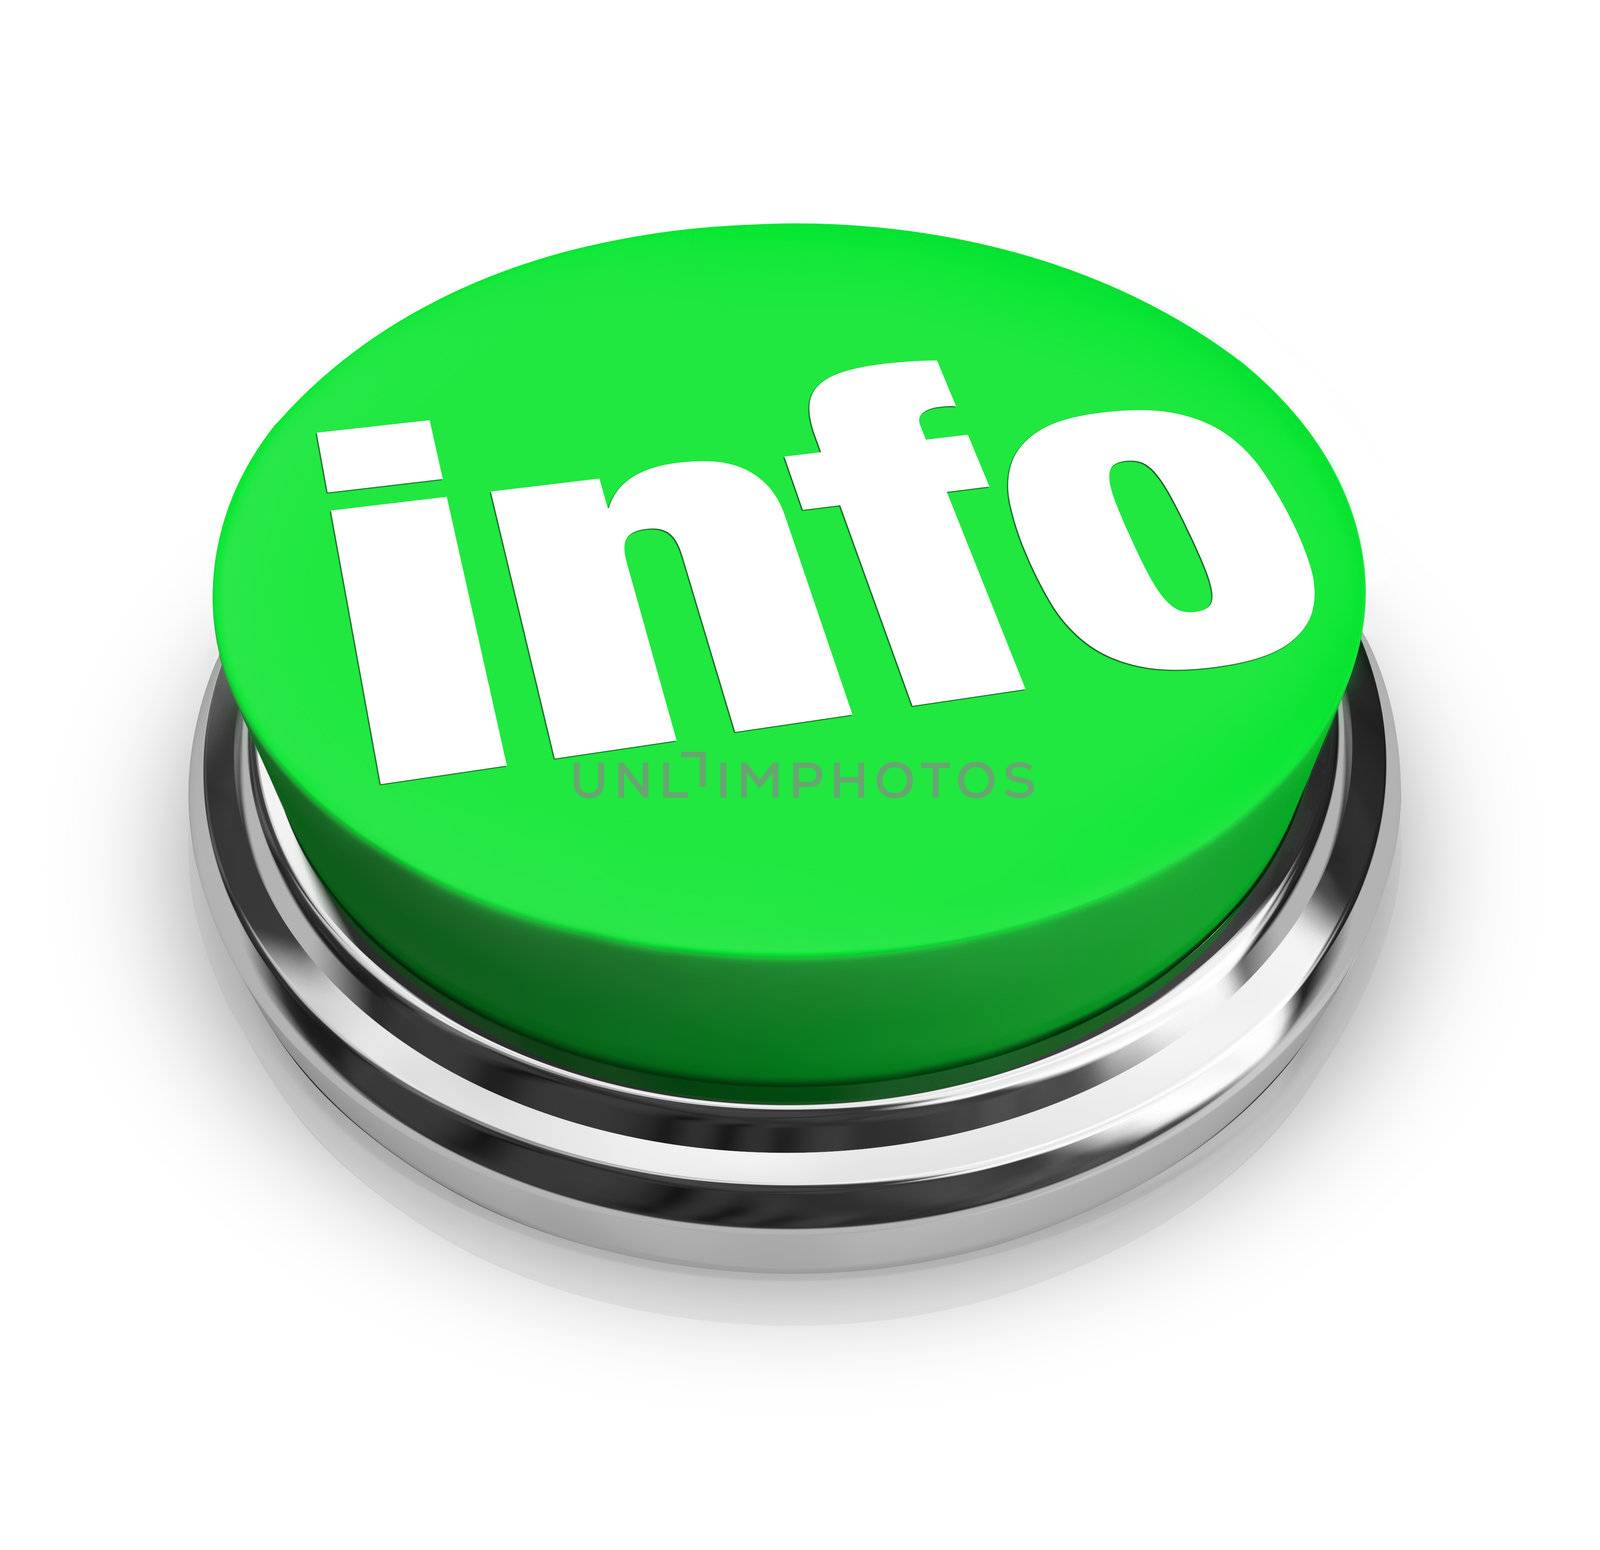 A green button with the word Info representing a way to get more information to answer your questions on an important matter, product or news feature